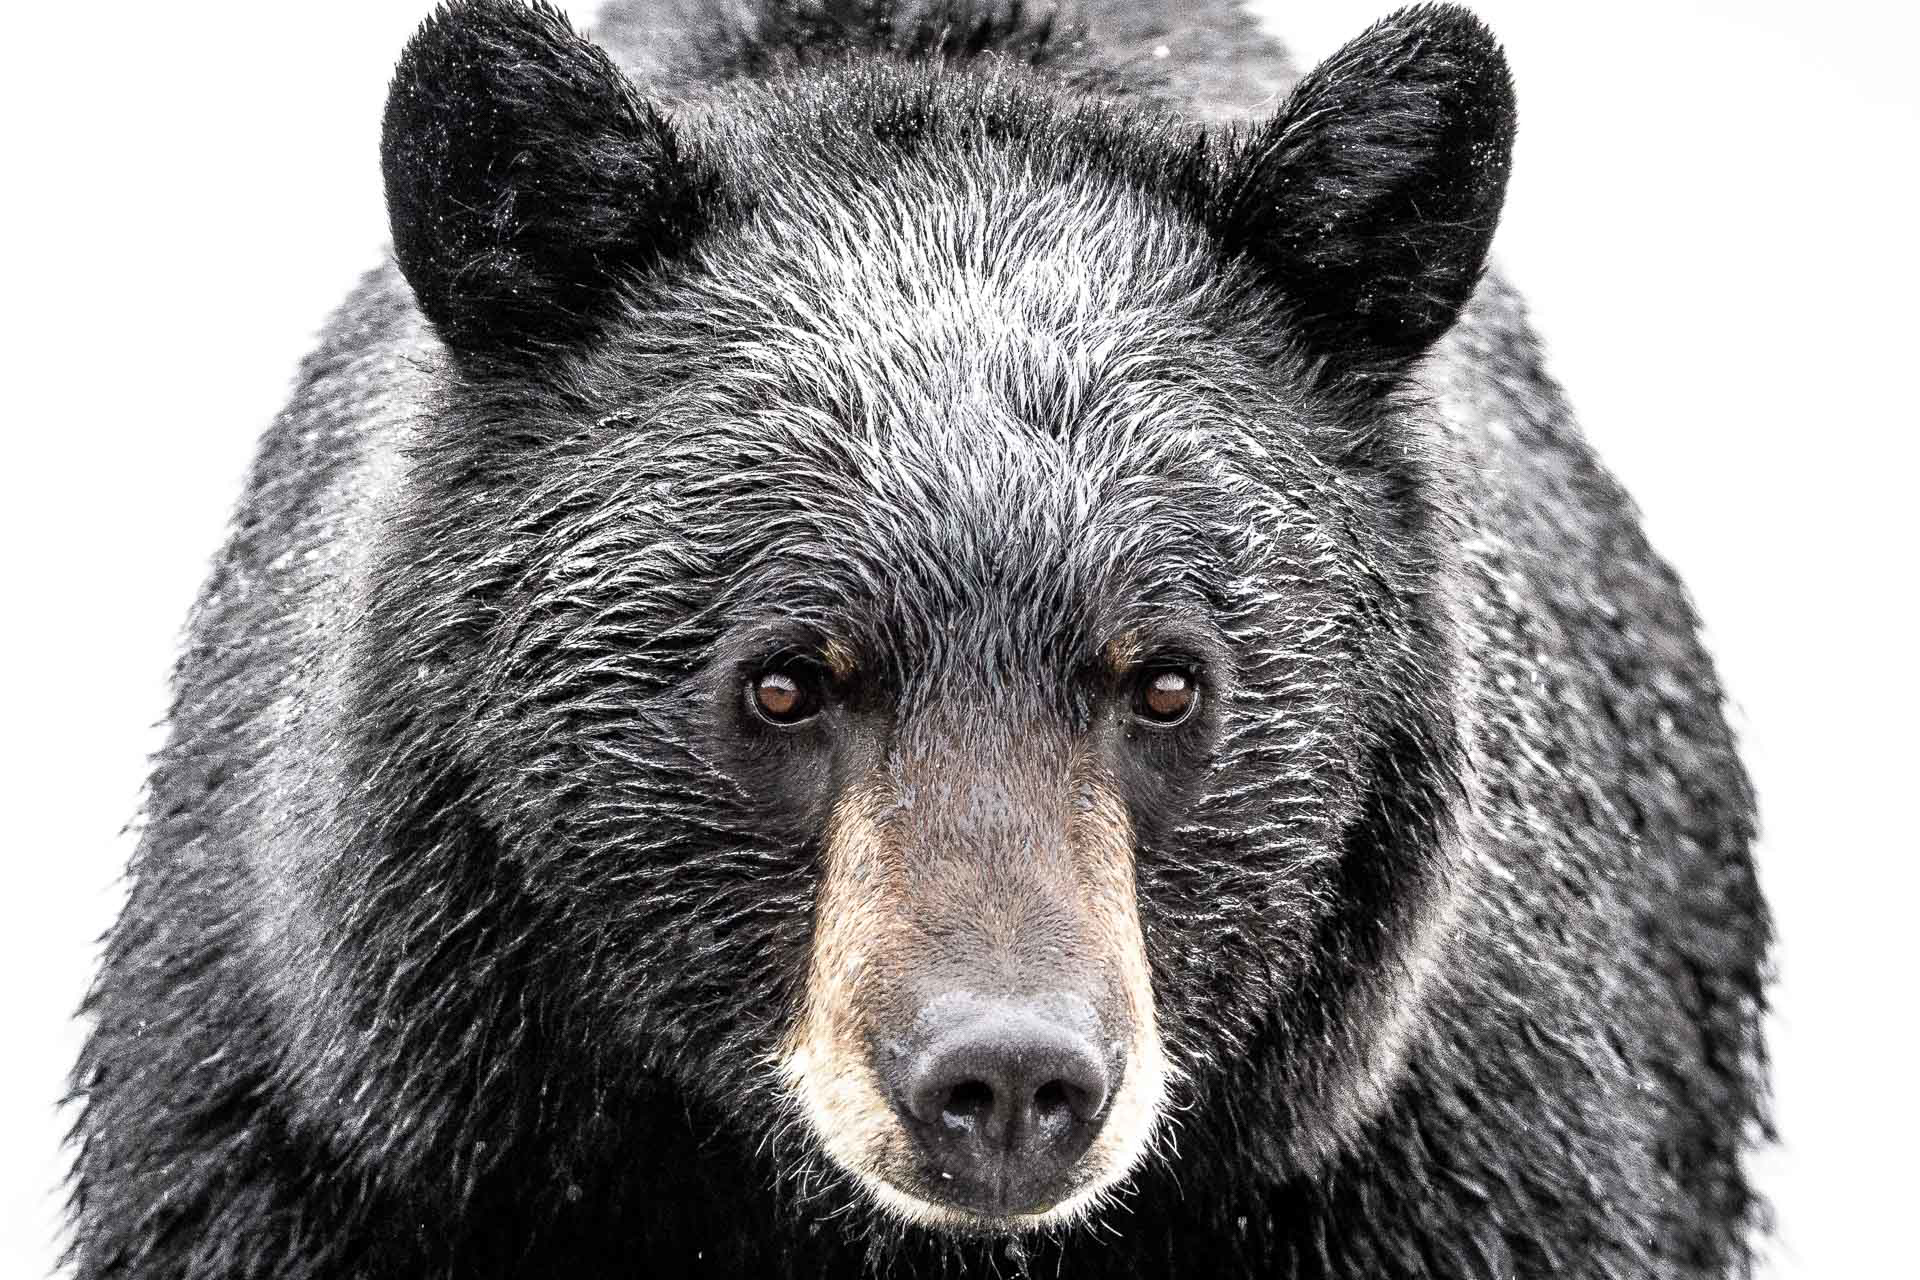 Rare High Detail Photograph Of Wet Furred Black Bear At Eye Level Printed On Metal, By Dwight Vasel, Framed And Available At Gallery Wild 